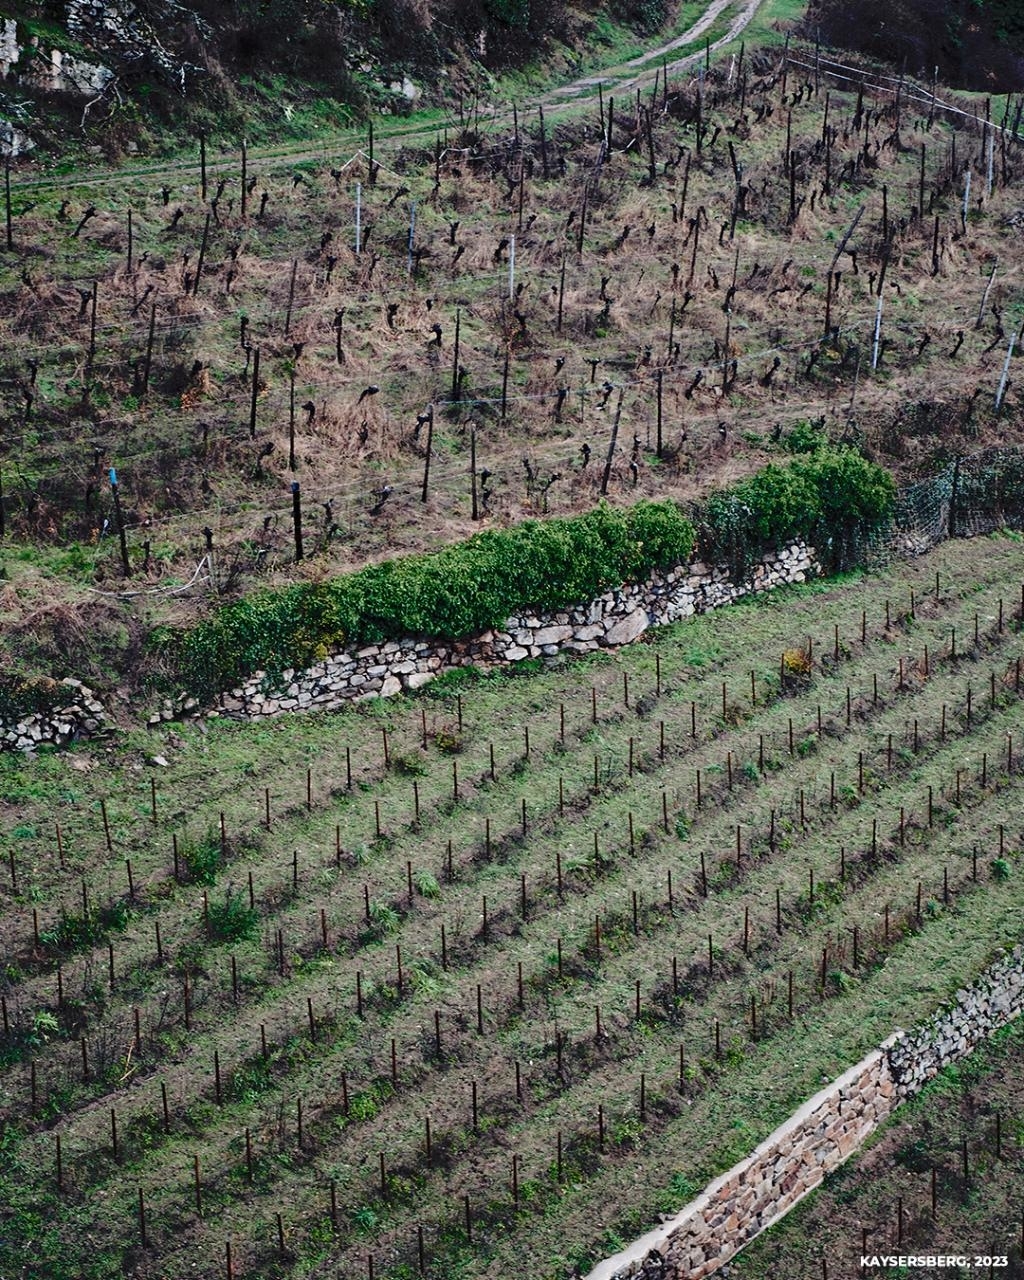 Aerial view of a vineyard with dormant vines and a stone wall dividing the terraces